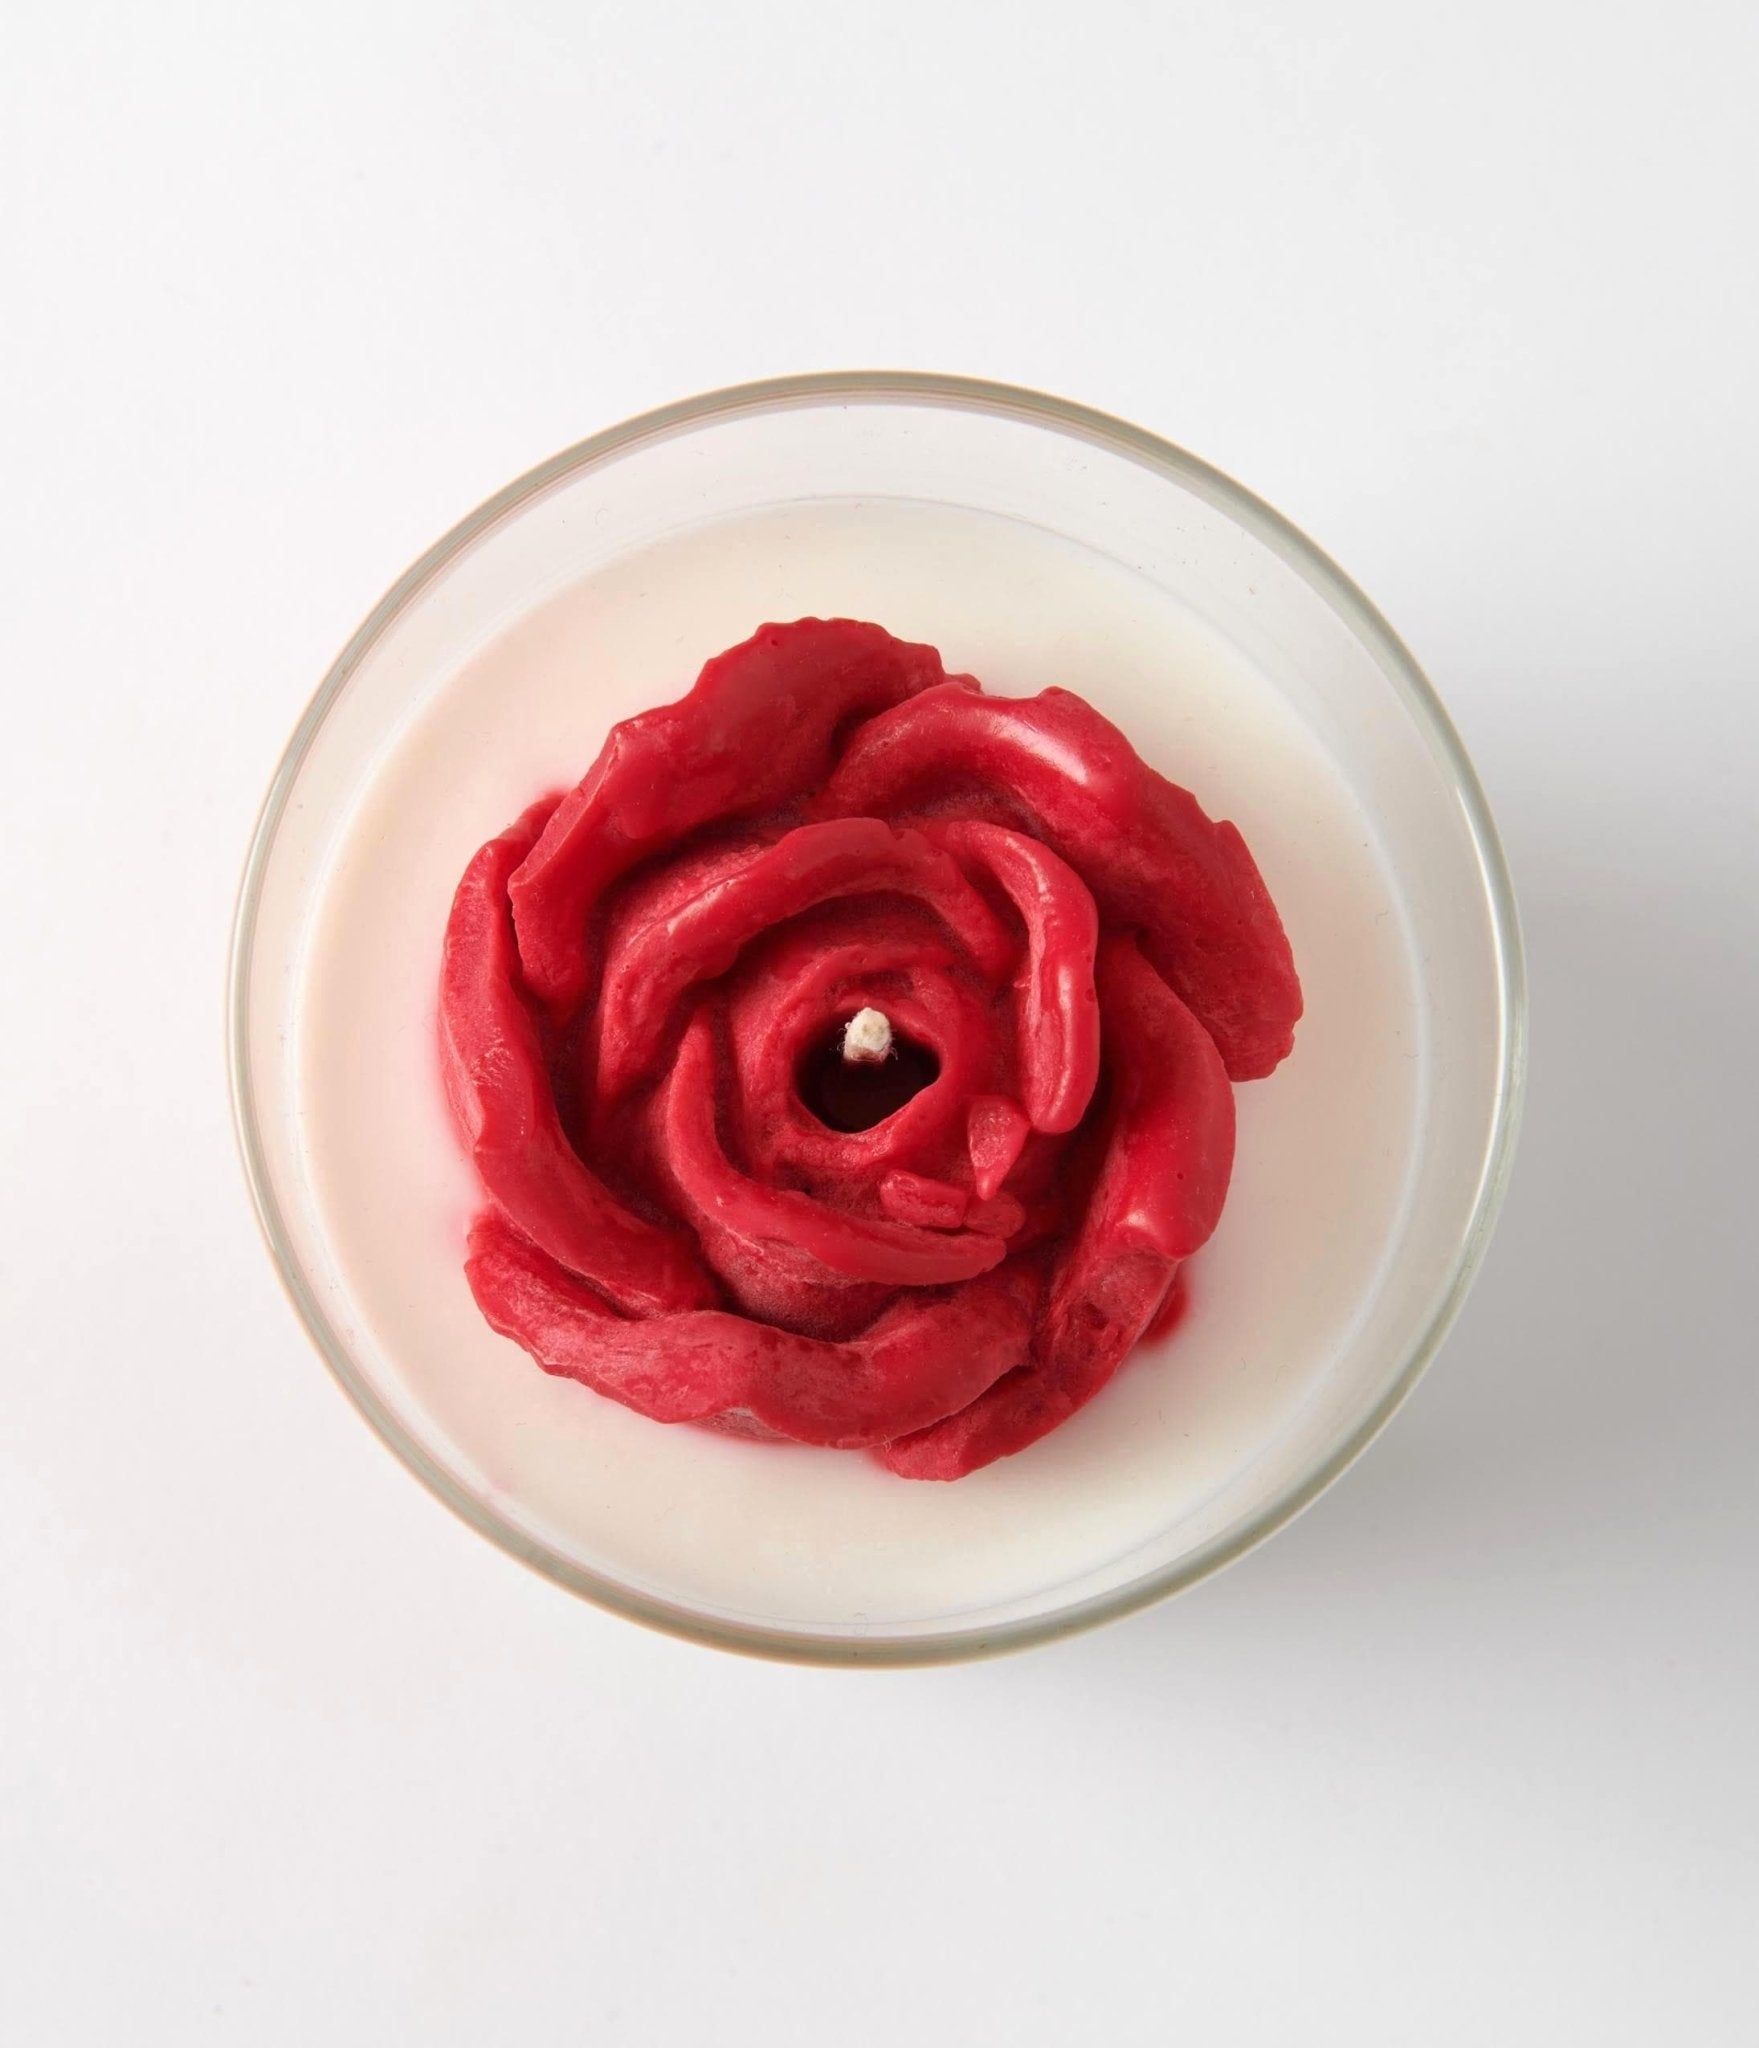 A Single Red Rose Candle - Unique Vintage - Womens, ACCESSORIES, GIFTS/HOME